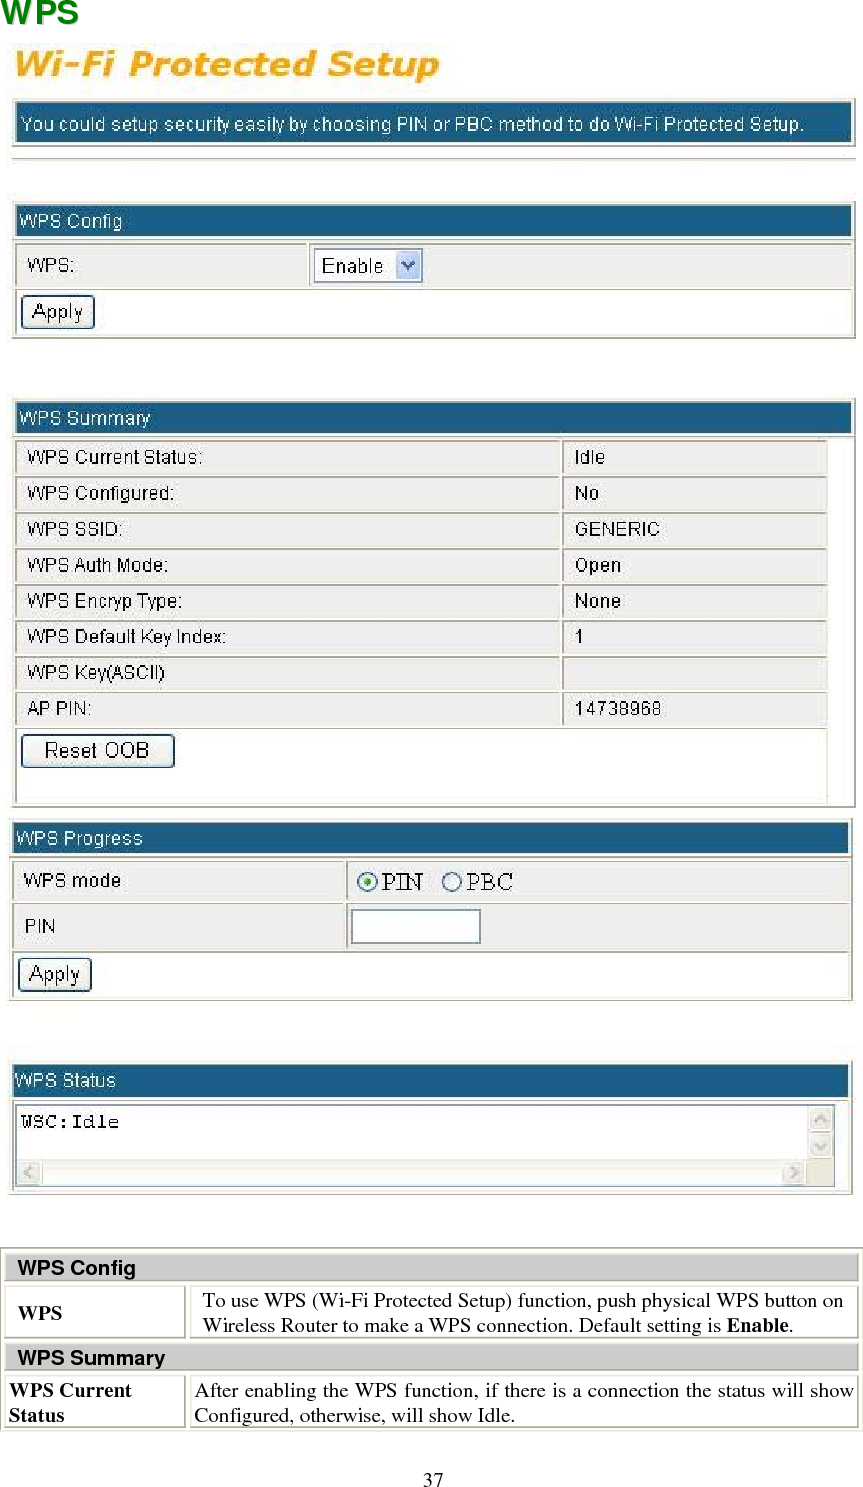   37WWPPSS    WPS Config WPS  To use WPS (Wi-Fi Protected Setup) function, push physical WPS button on Wireless Router to make a WPS connection. Default setting is Enable. WPS Summary WPS Current Status  After enabling the WPS function, if there is a connection the status will show Configured, otherwise, will show Idle. 